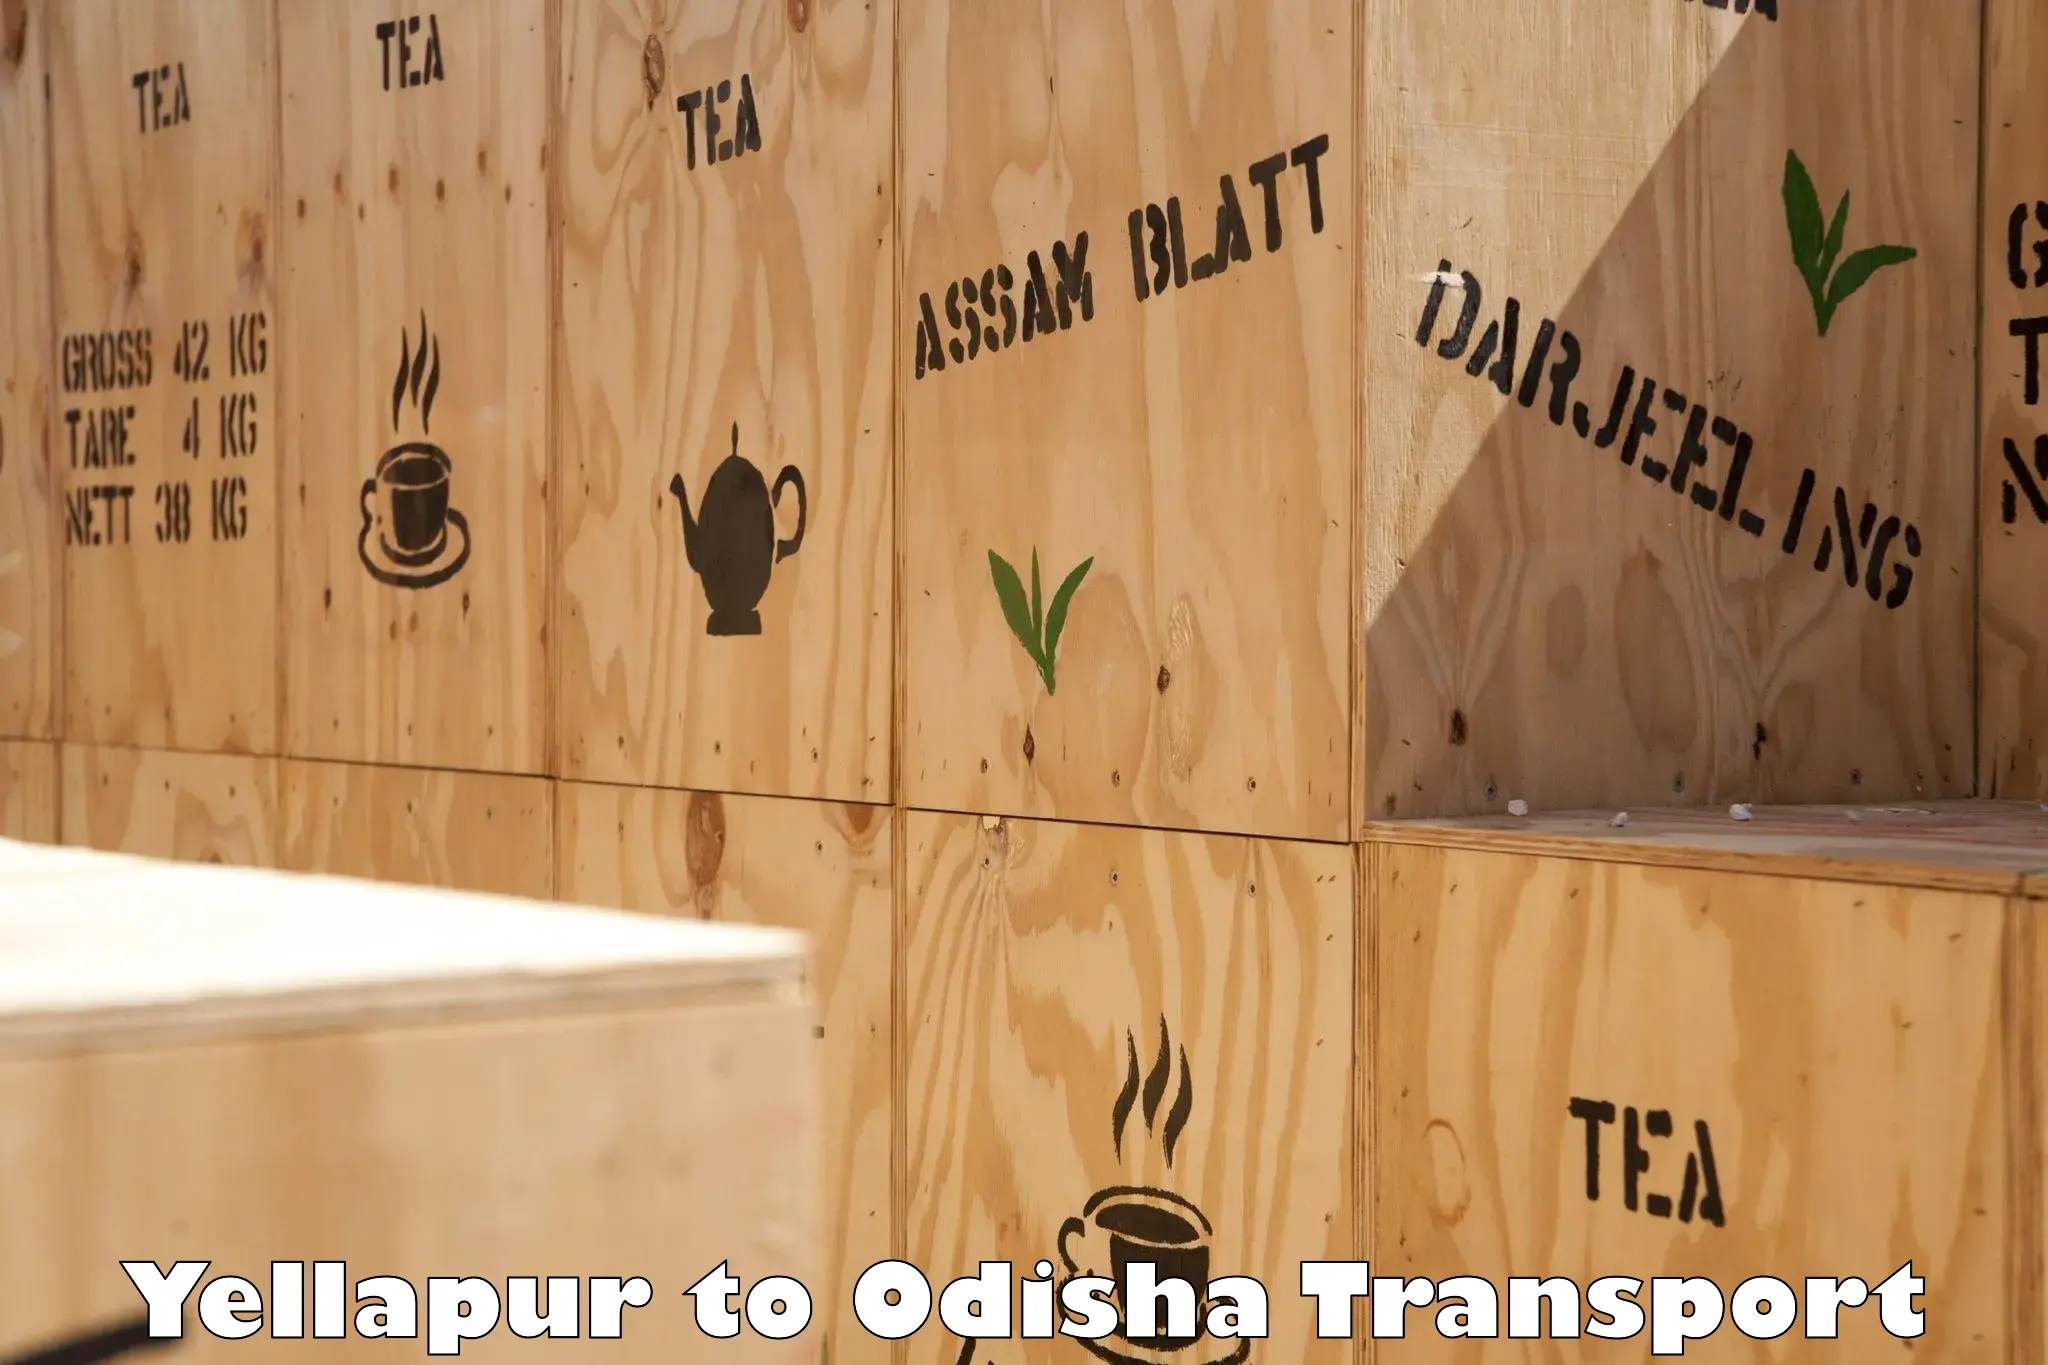 Container transport service Yellapur to Chandipur